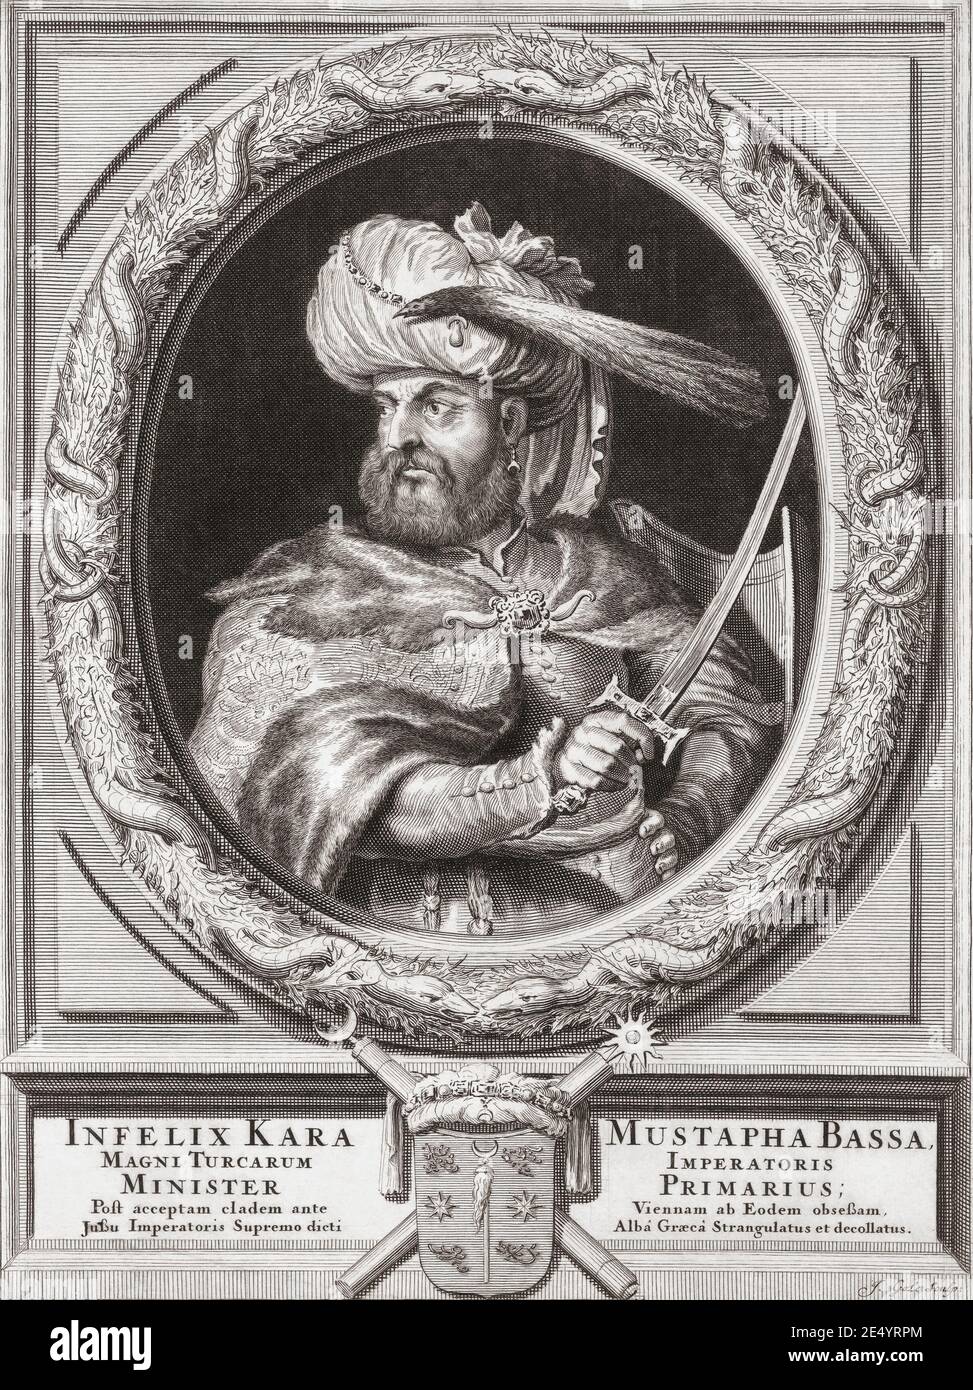 Kara Mustafa Pasha,  c. 1634 - 1683.  Albanian Ottoman nobleman, Grand Admiral in the Ottoman navy and later Commander-in-Chief in the Ottoman army.  The defeat of his forces in the Battle of Vienna in 1683 led to his execution.  After a work by Jacob Gole. Stock Photo